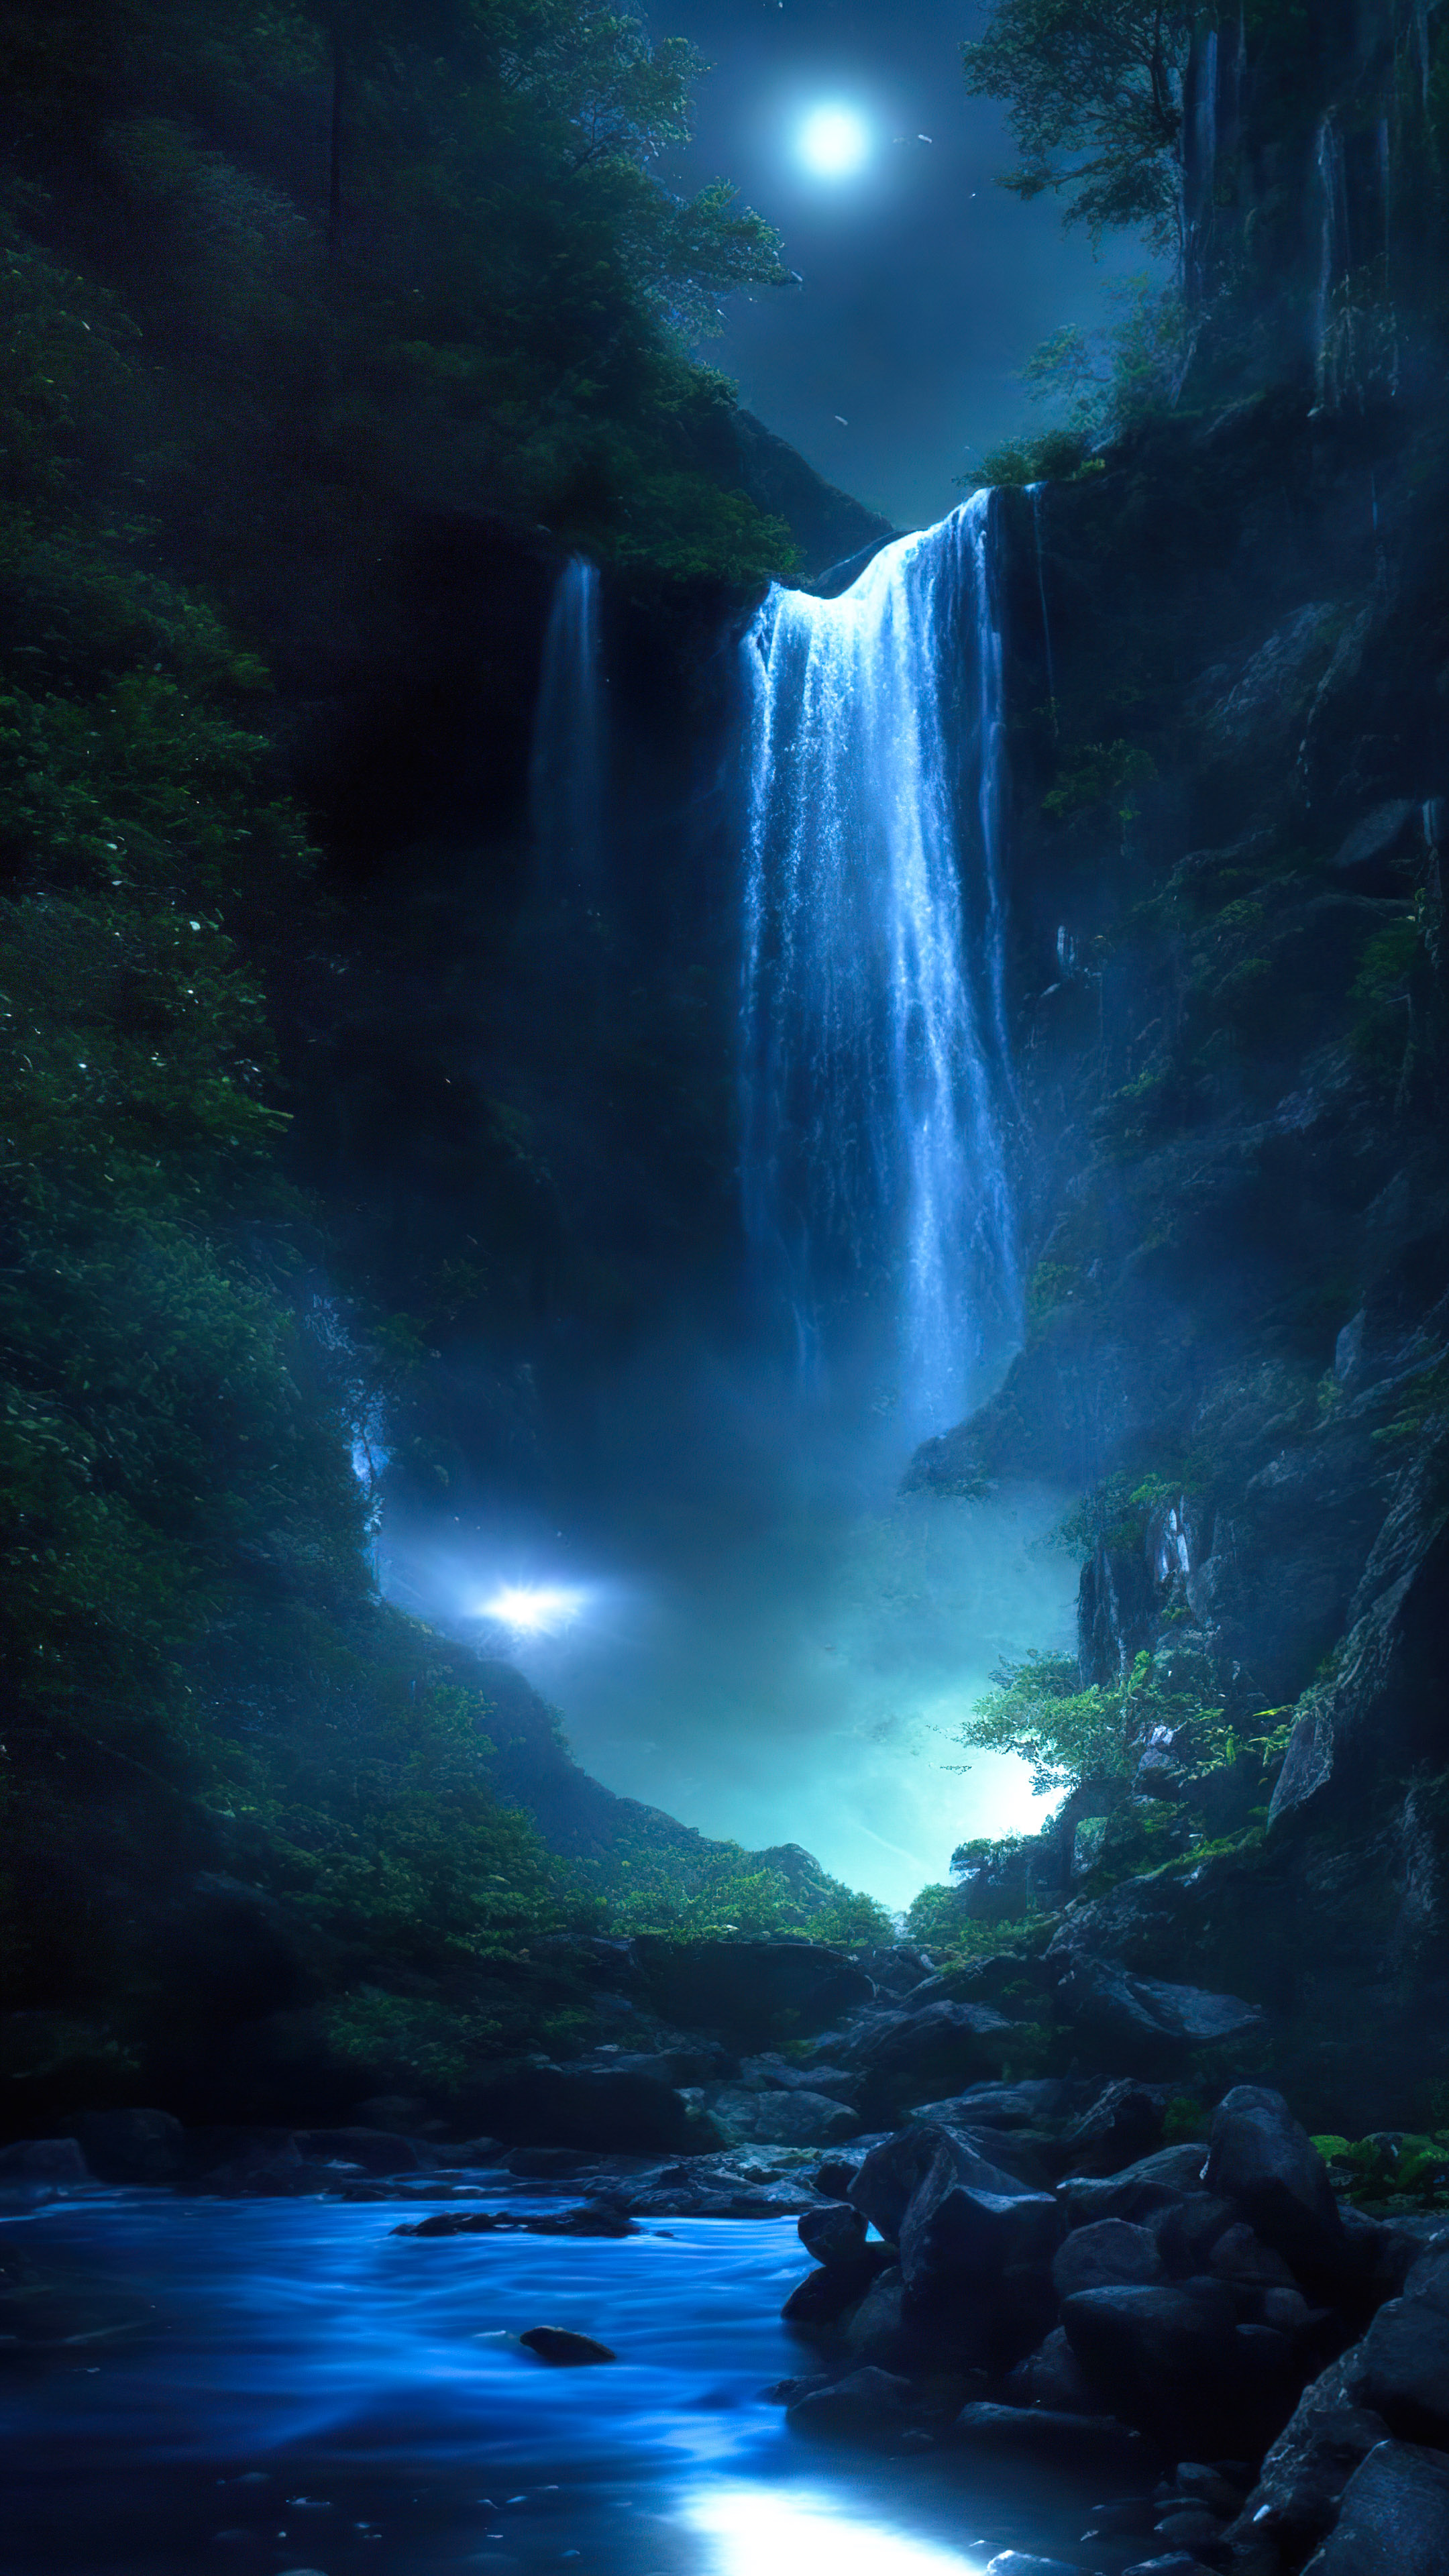 Capture the essence of paradise with our beautiful waterfall wallpaper, showcasing a magical waterfall illuminated by moonlight, with fireflies dancing around its cascading waters.